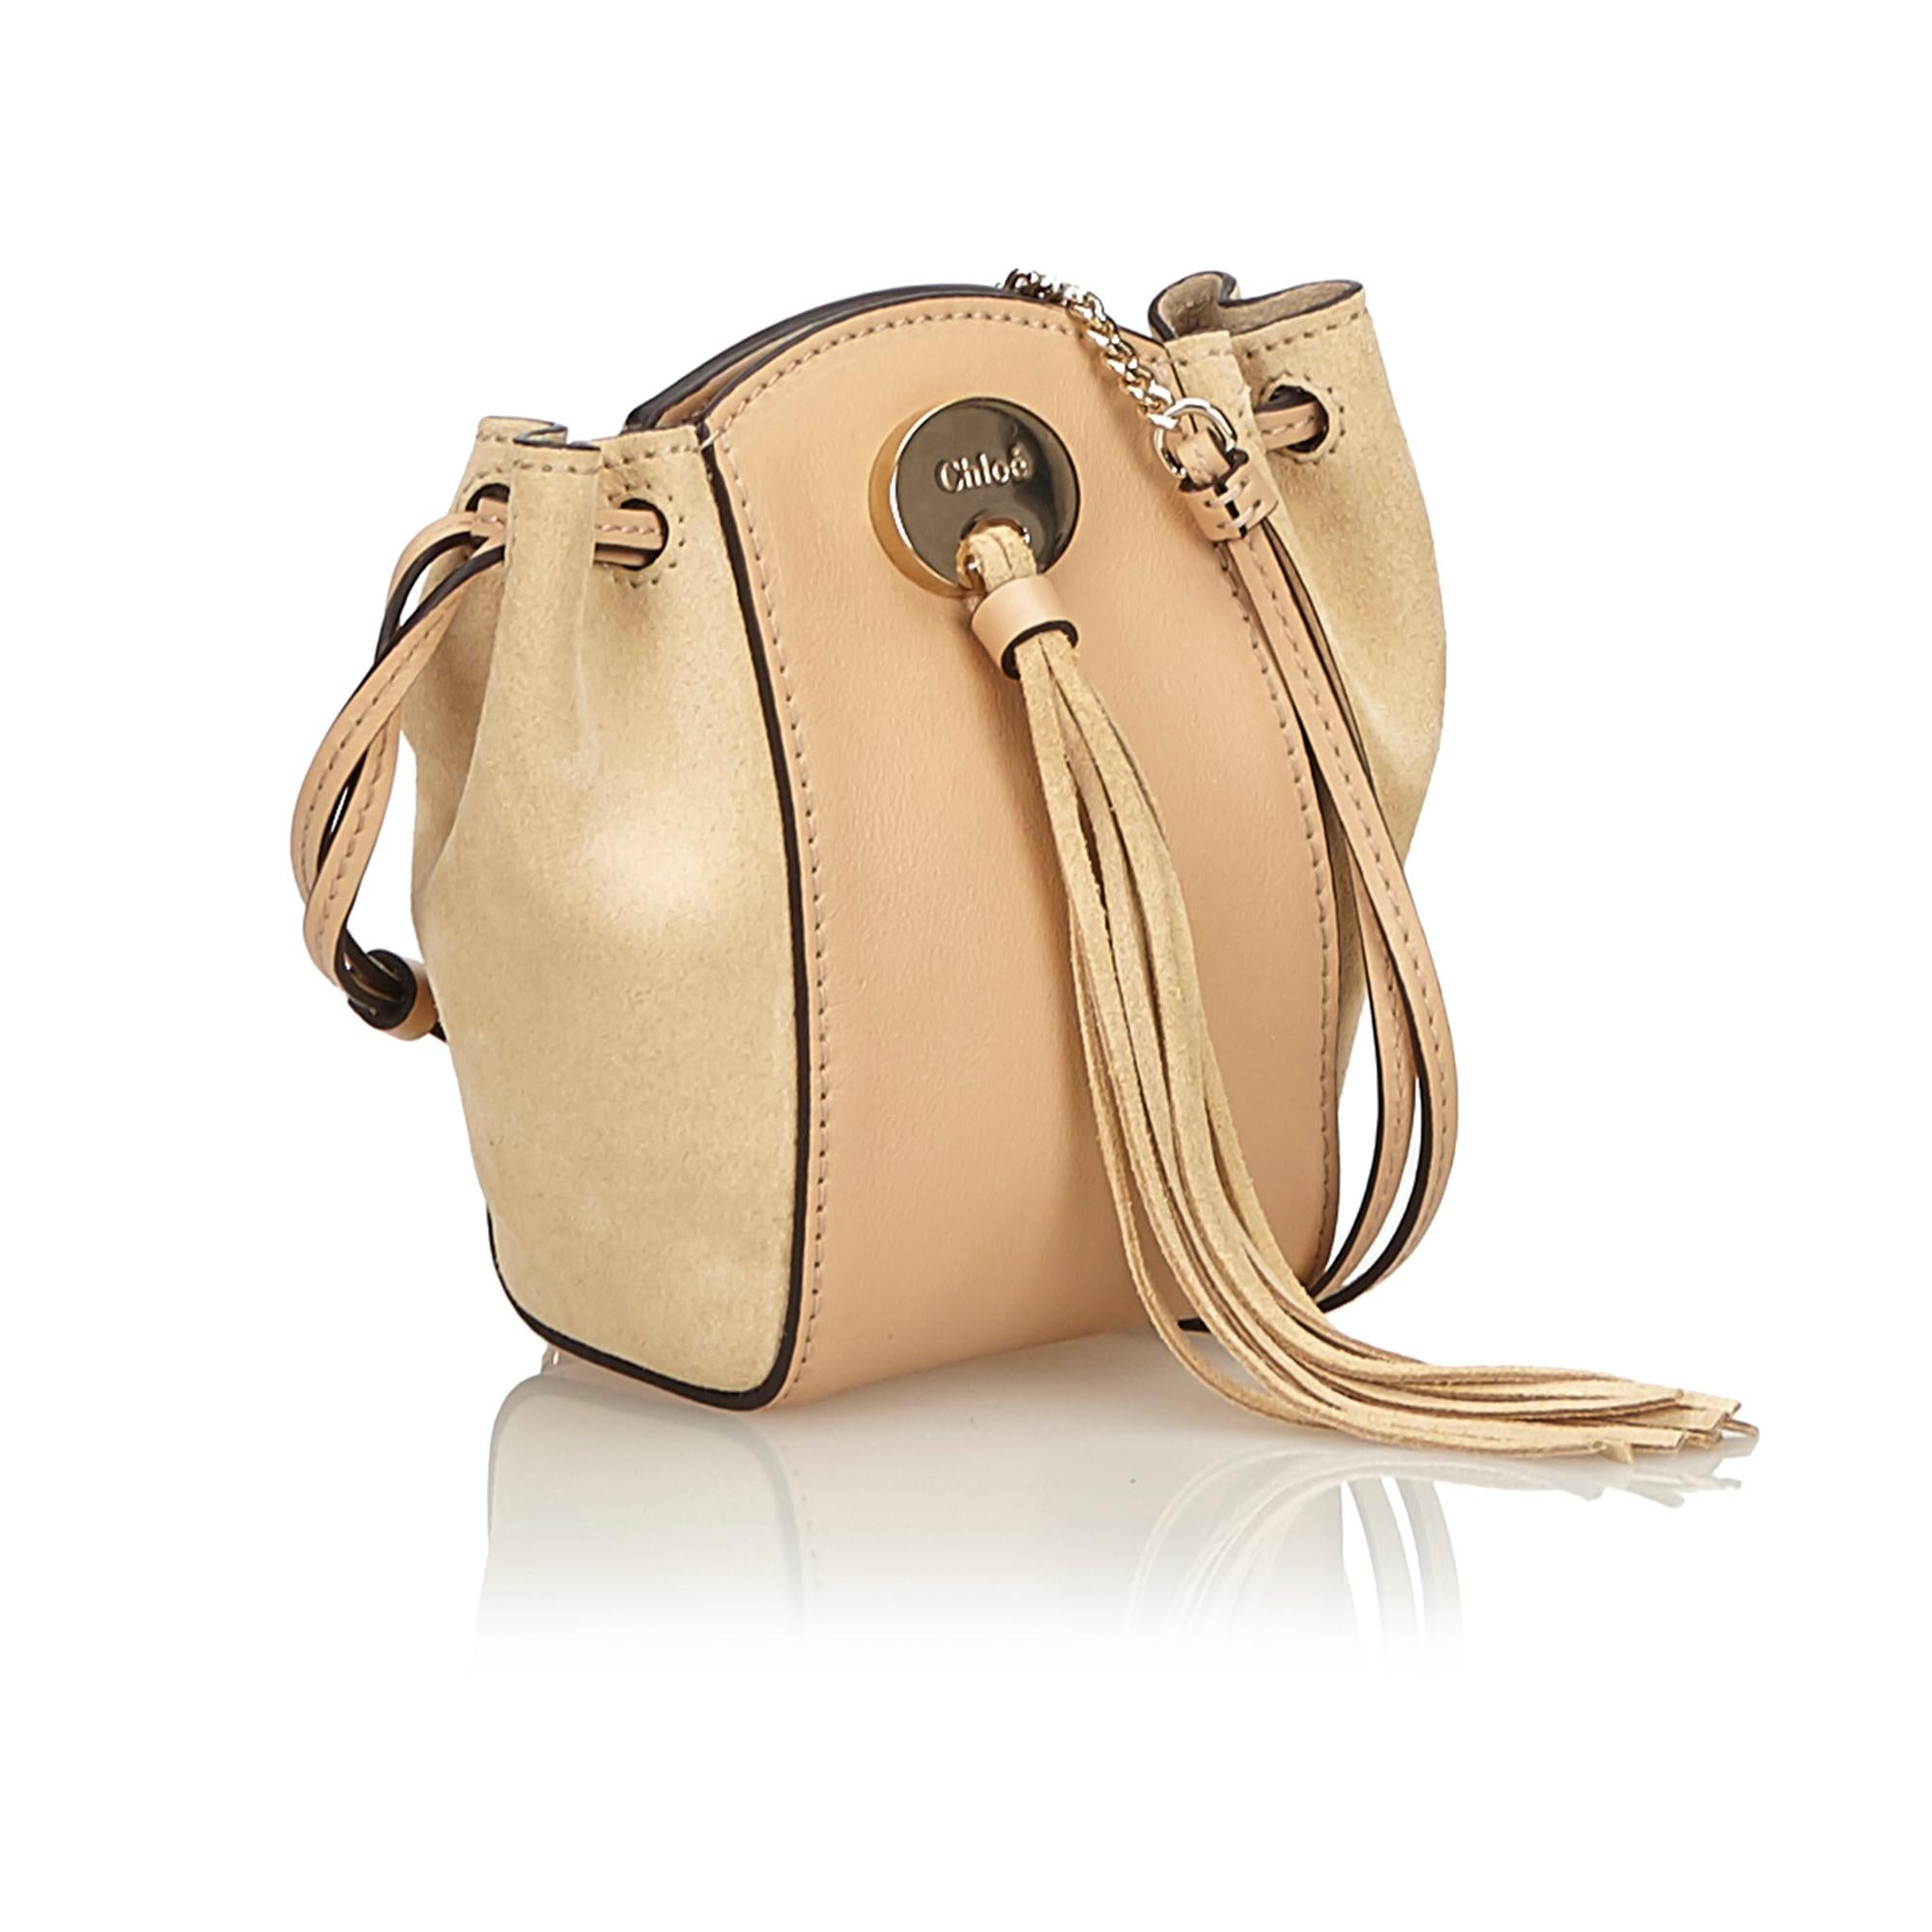 This shoulder bag features a leather and suede body, chain and tassel detail, flat leather strap, drawstring with button clasp closure. It carries as B+ condition rating.

Inclusions: 
Dust Bag
Box

Dimensions:
Length: 13.00 cm
Width: 14.00